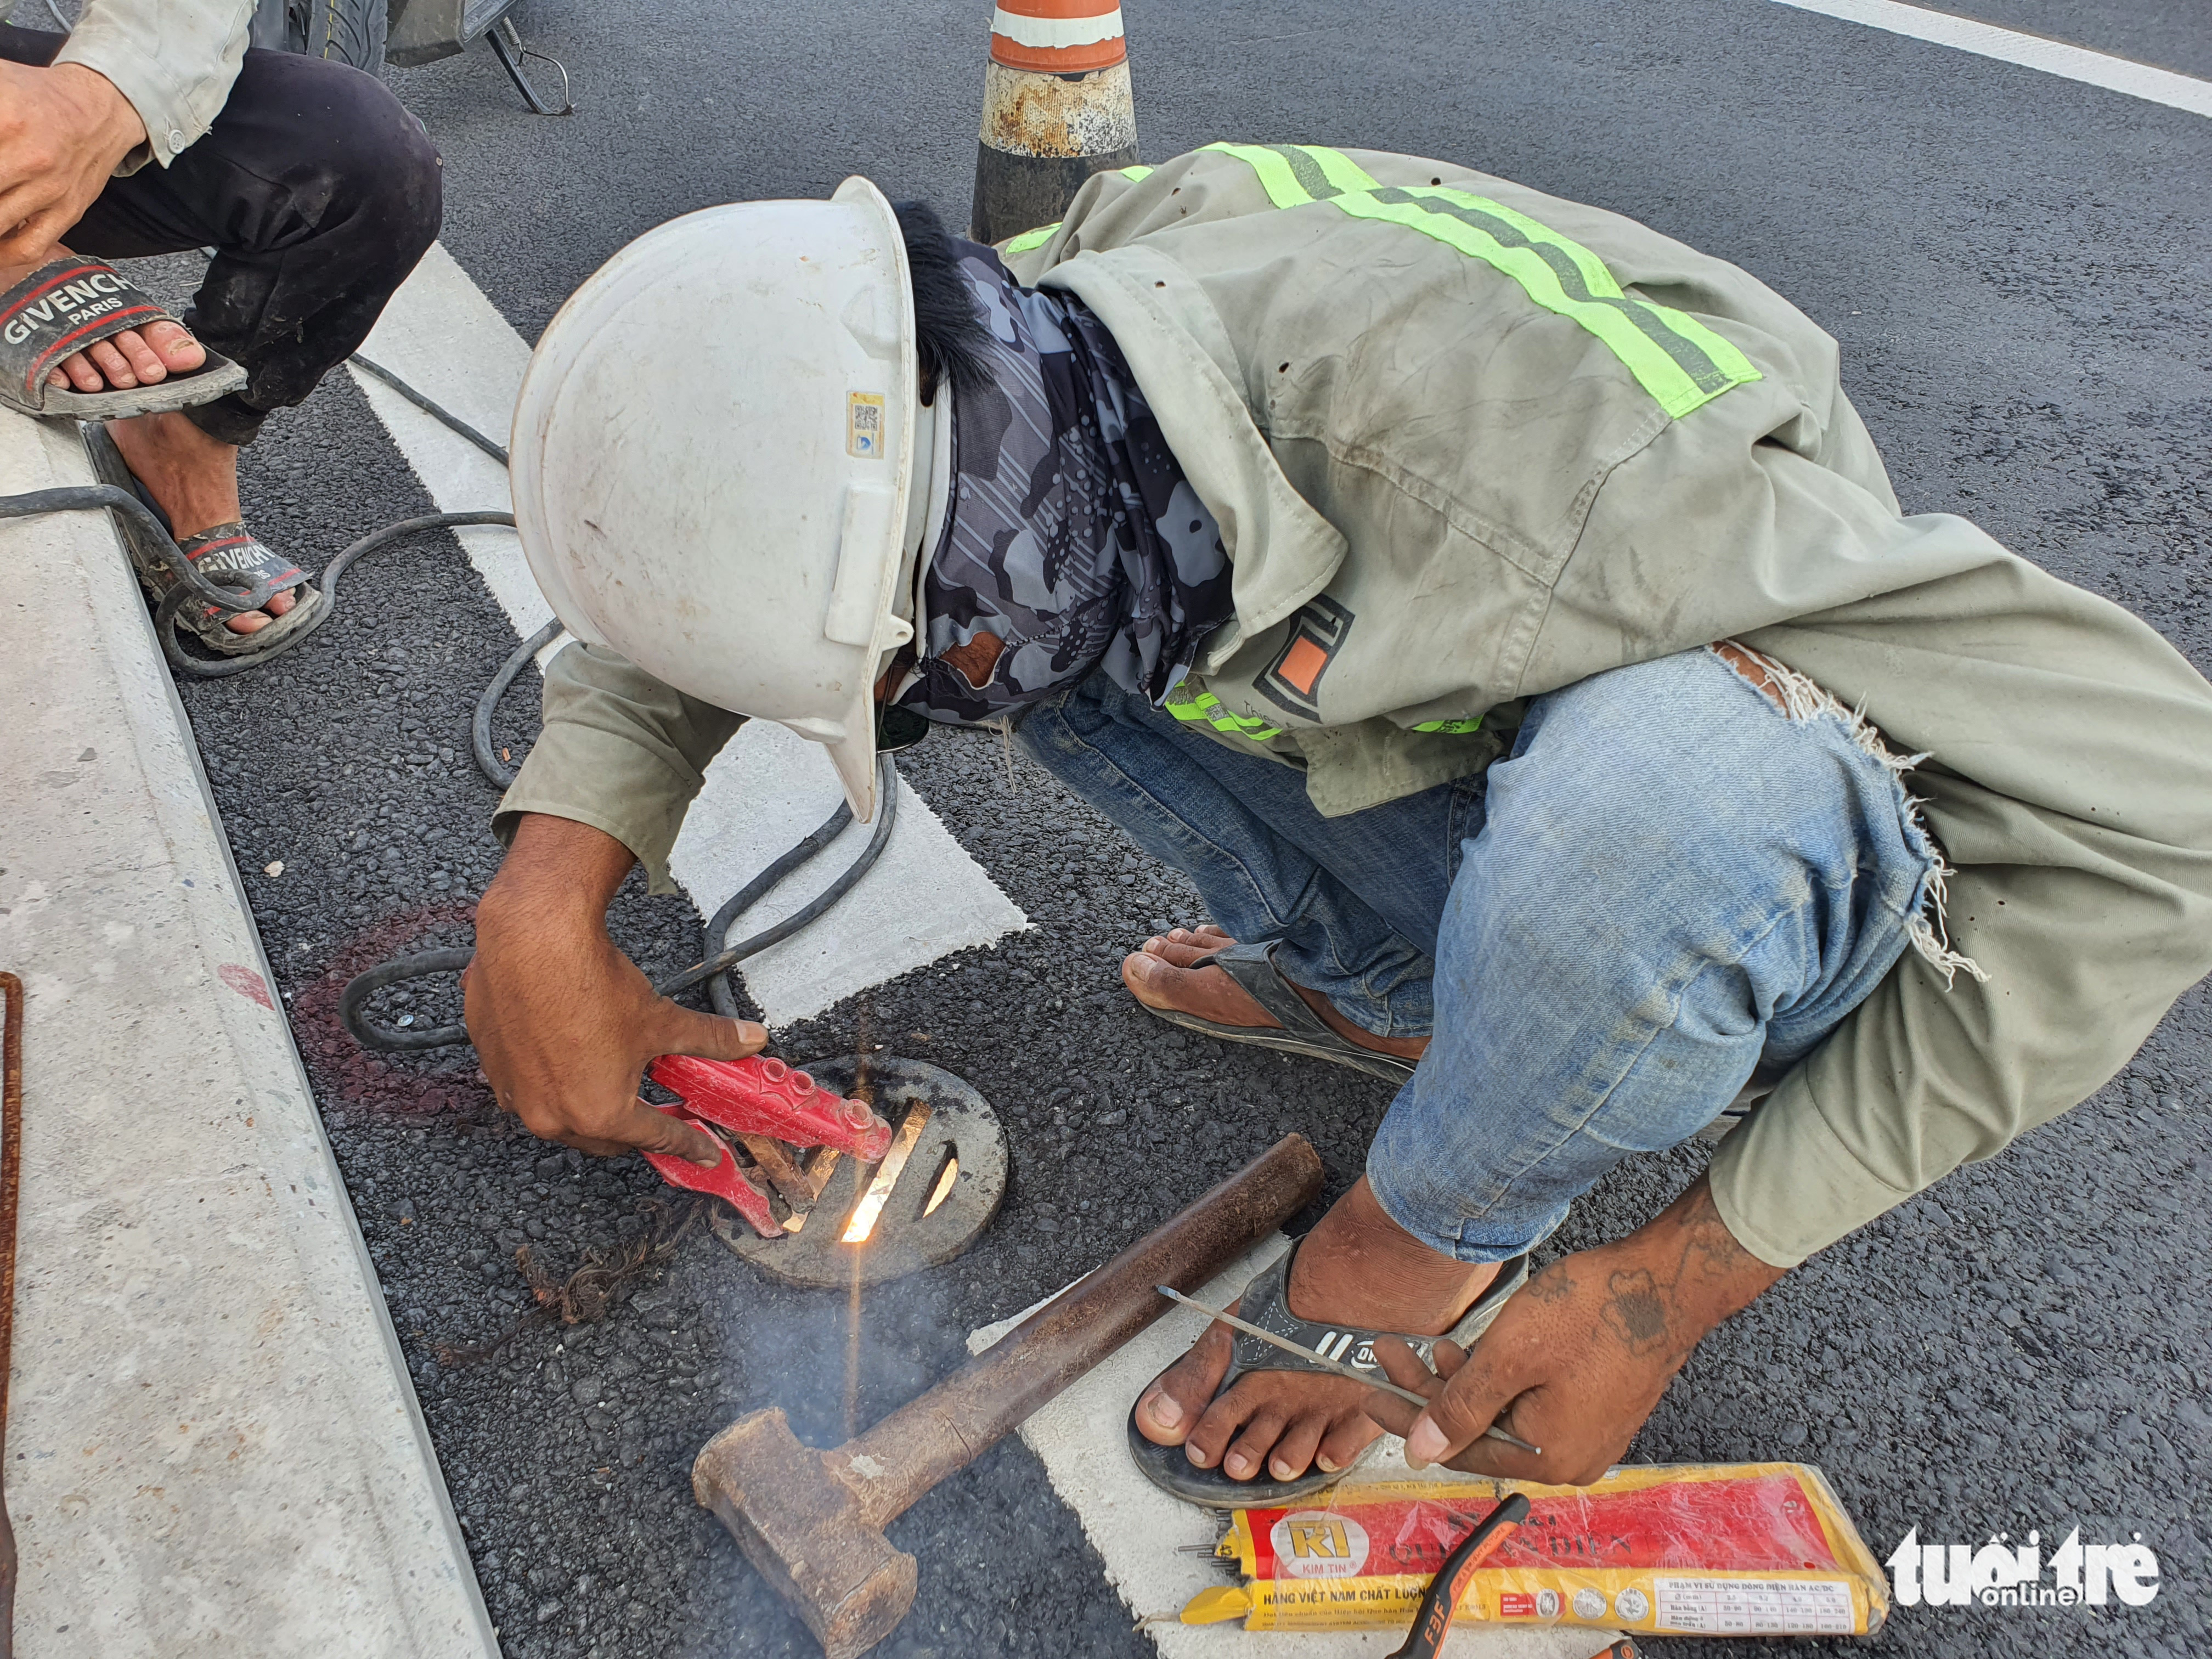 A workers welds the cover to prevent it from being stolen on Thu Thiem 2 Bridge in Ho Chi Minh City. Photo: Minh Hoa / Tuoi Tre